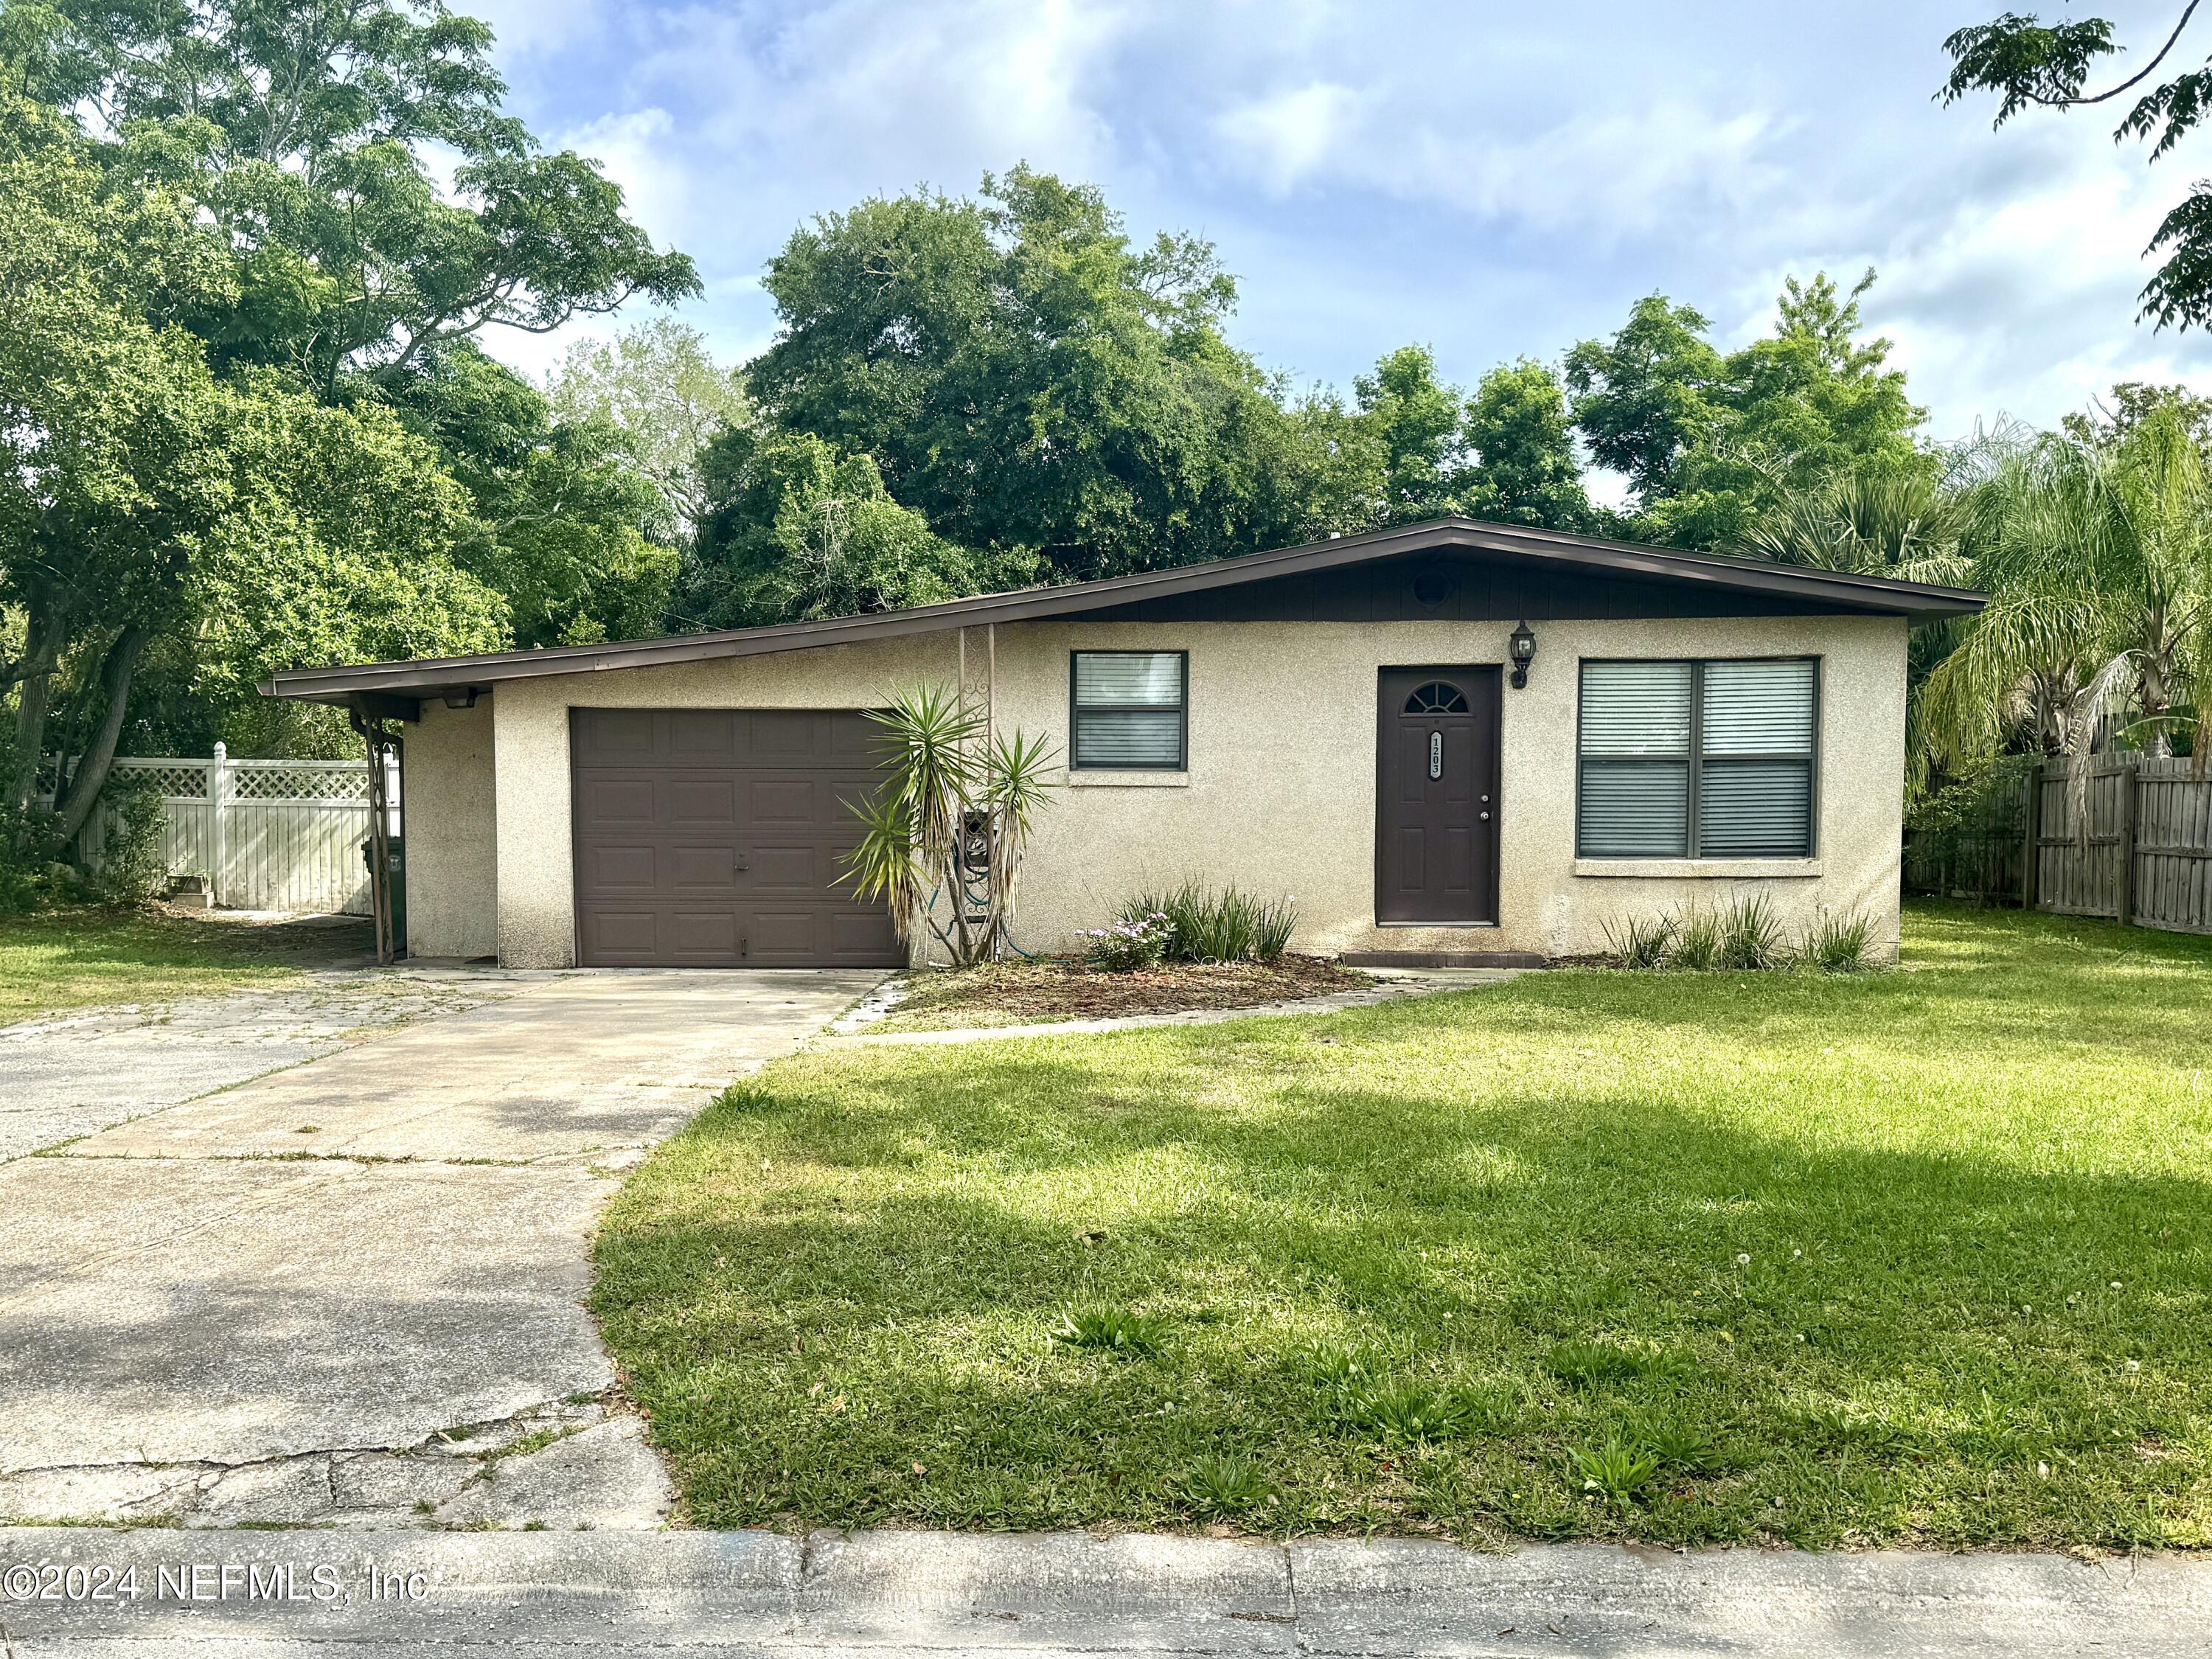 Jacksonville Beach, FL home for sale located at 1203 13th Avenue N, Jacksonville Beach, FL 32250